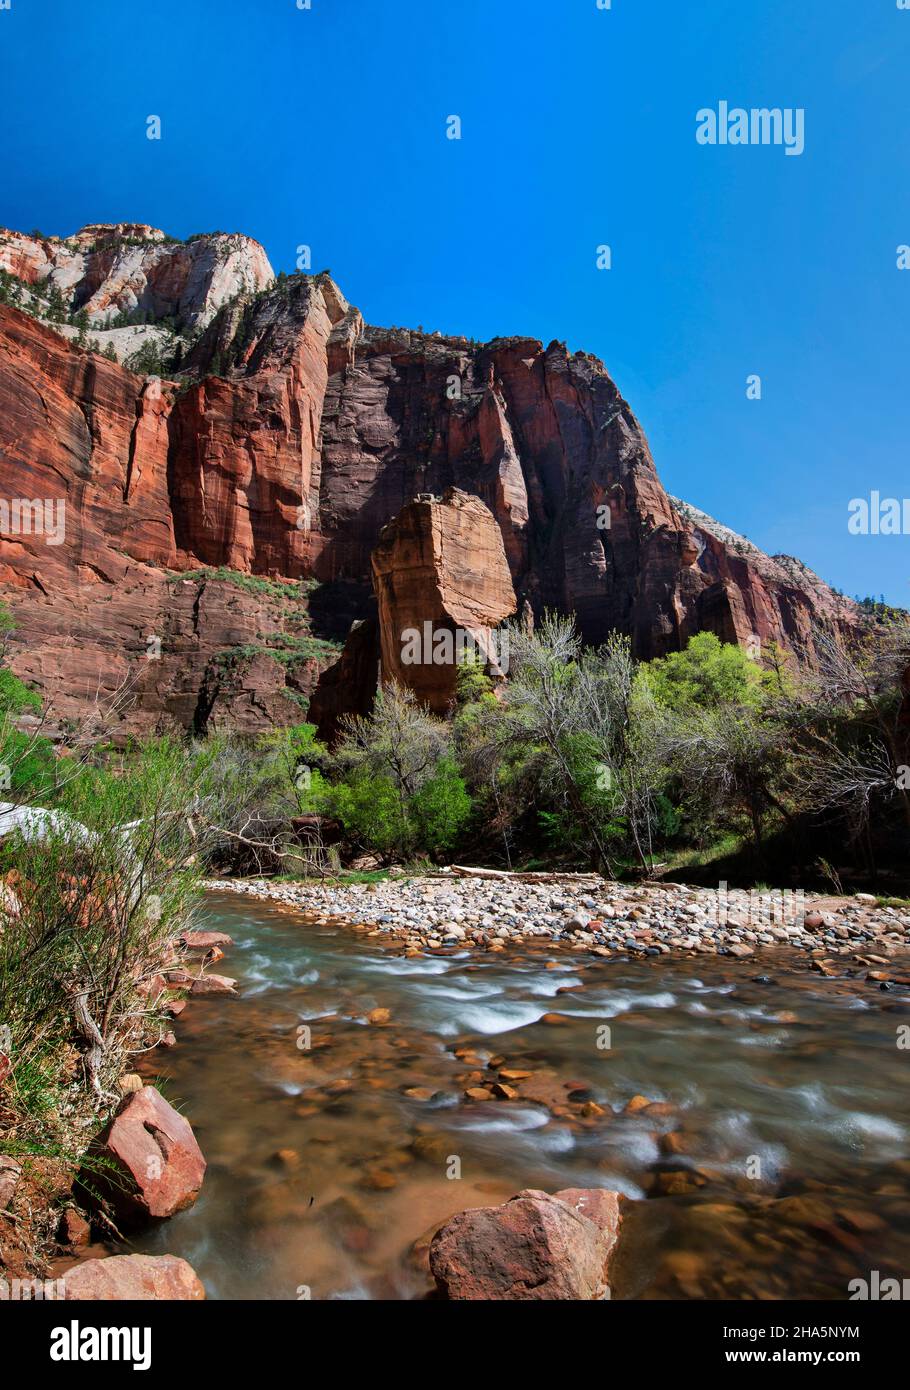 Temple of Sinawava Trail follows the Virgin River upstream through ever-narrowing canyons, Zion National Park, Utah Stock Photo